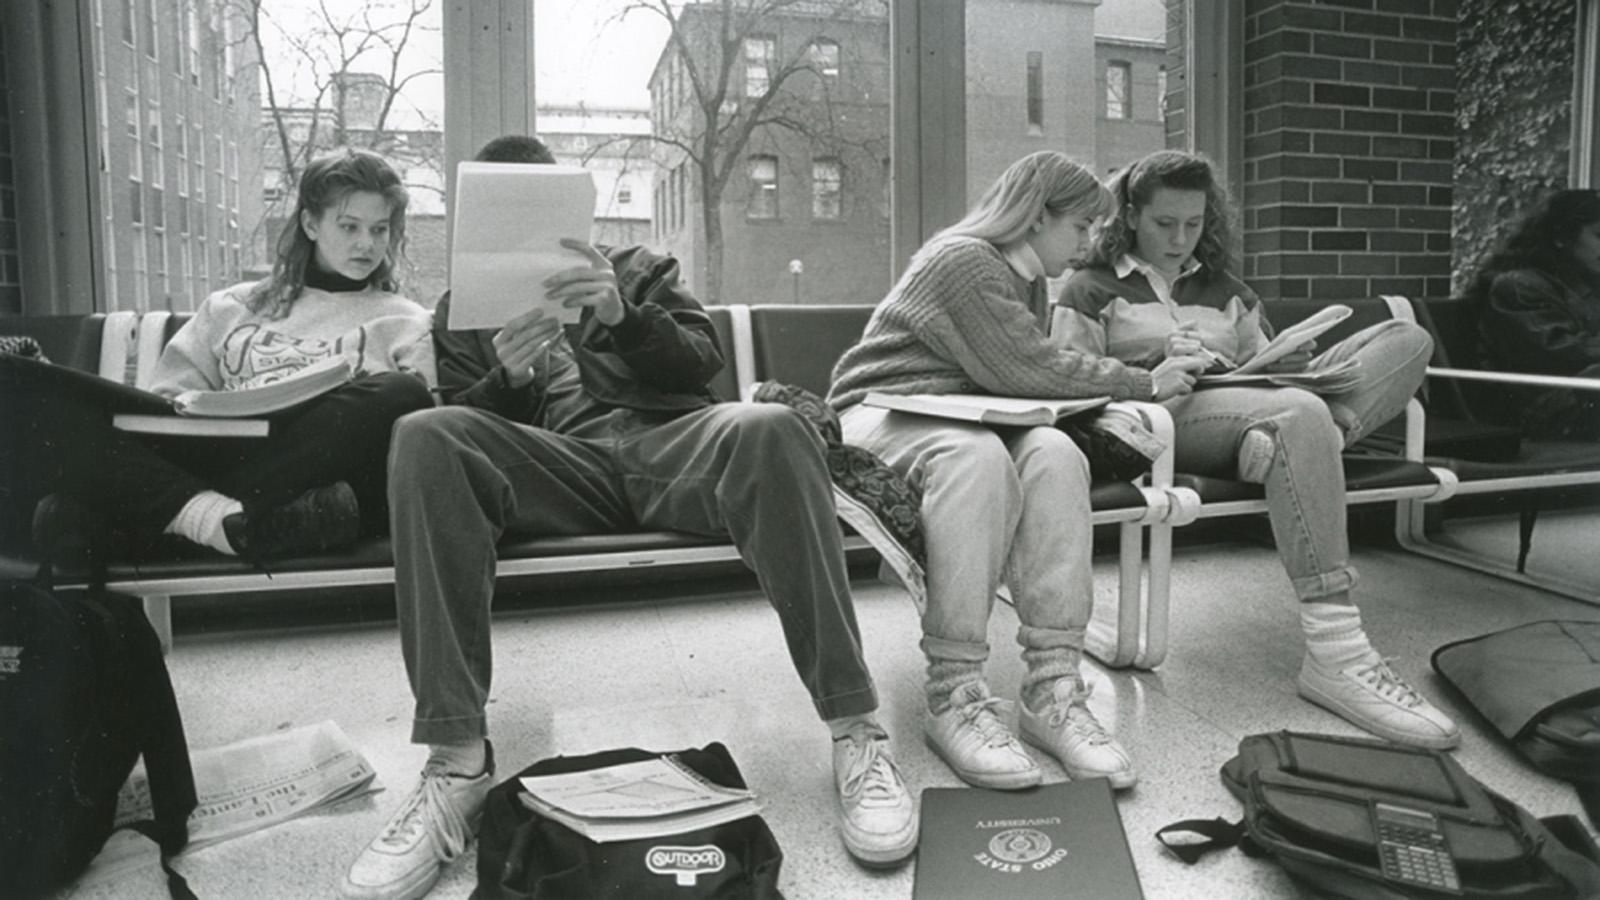 Students from the early 1990s studying